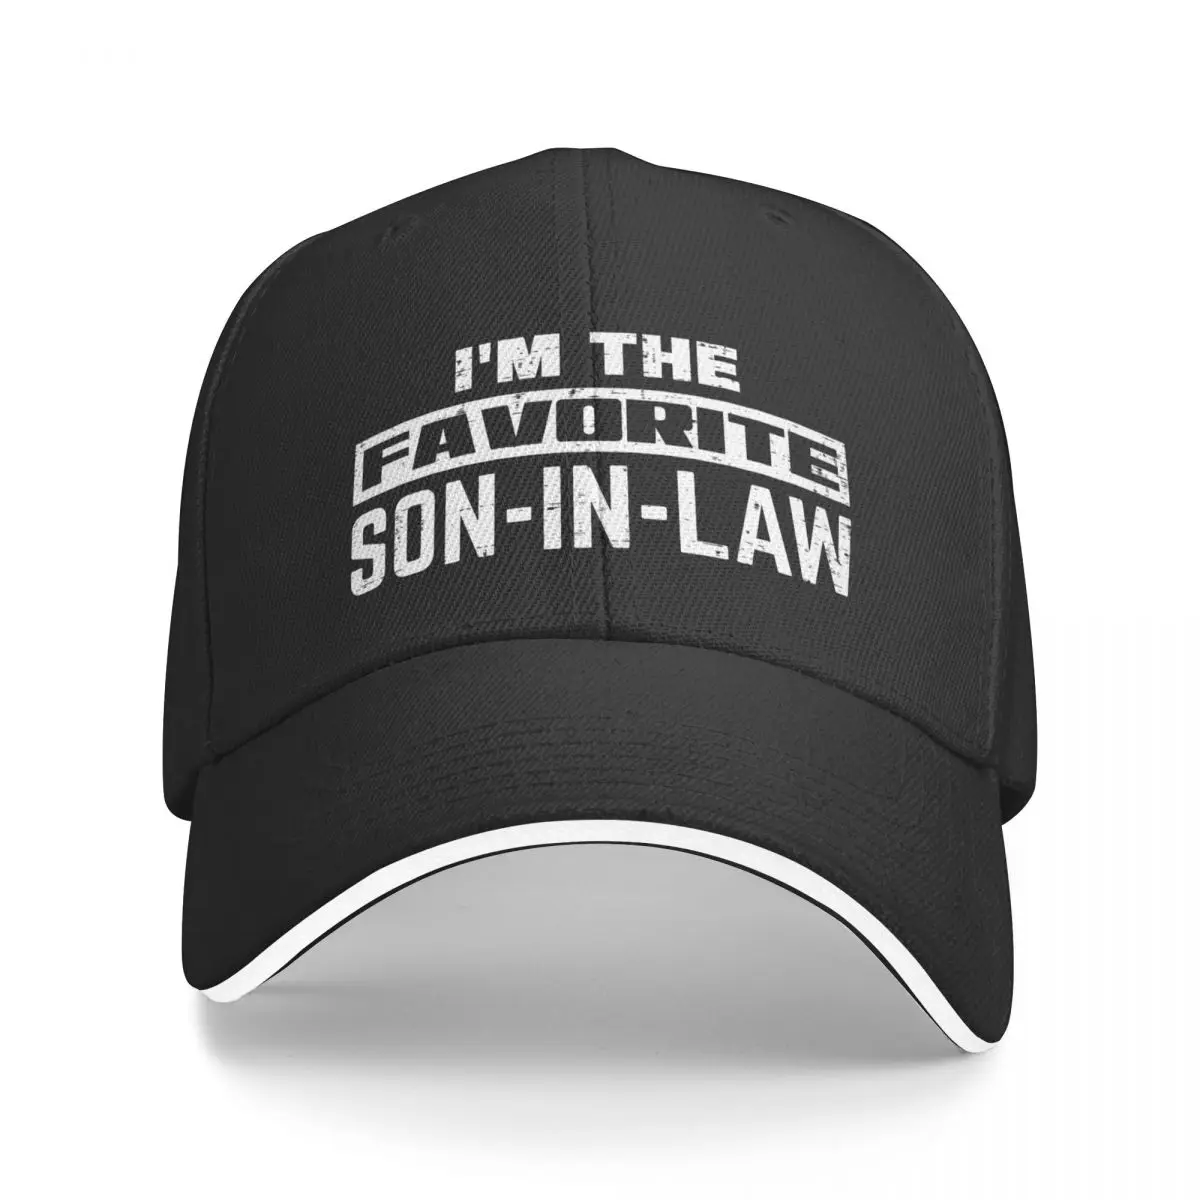 

I'm the favorite son in law funny saying Baseball Cap derby hat Sun Hat For Children Dropshipping Woman Men's